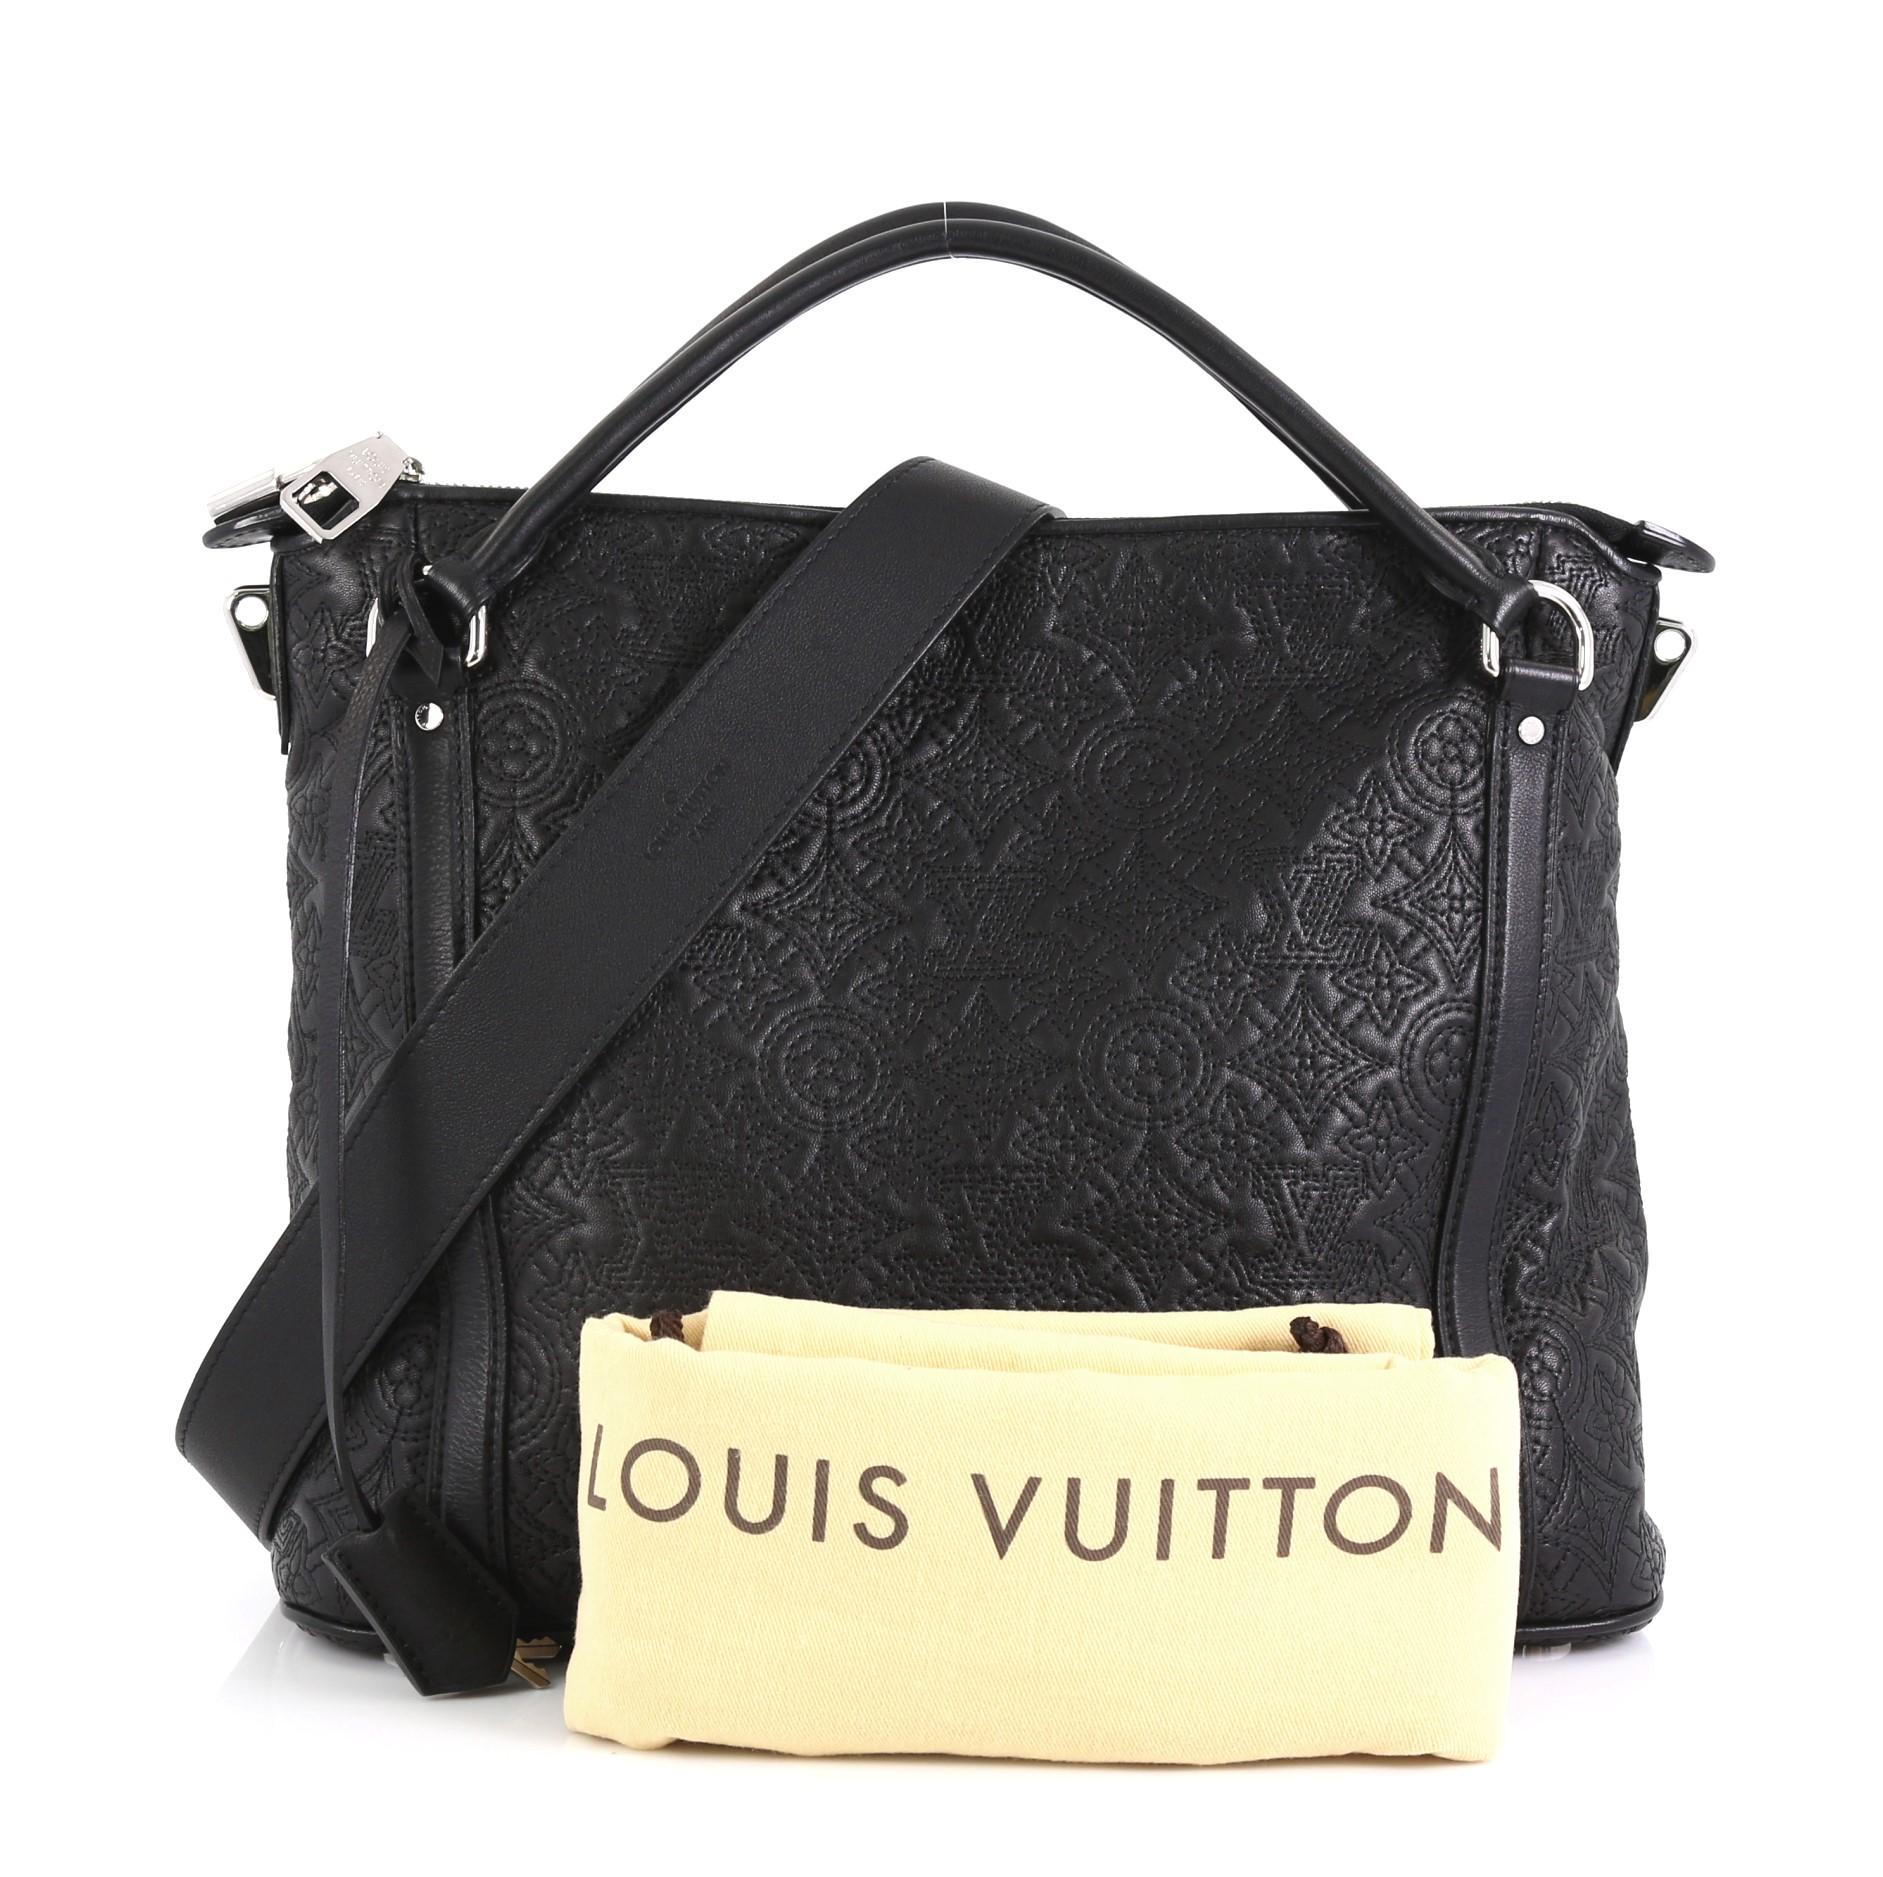 This Louis Vuitton Antheia Ixia Handbag Leather PM, crafted in black leather, features dual rolled leather handles, stitched monogram flower patterns, and silver-tone hardware. Its zip closure opens to a black microfiber interior with zip and slip